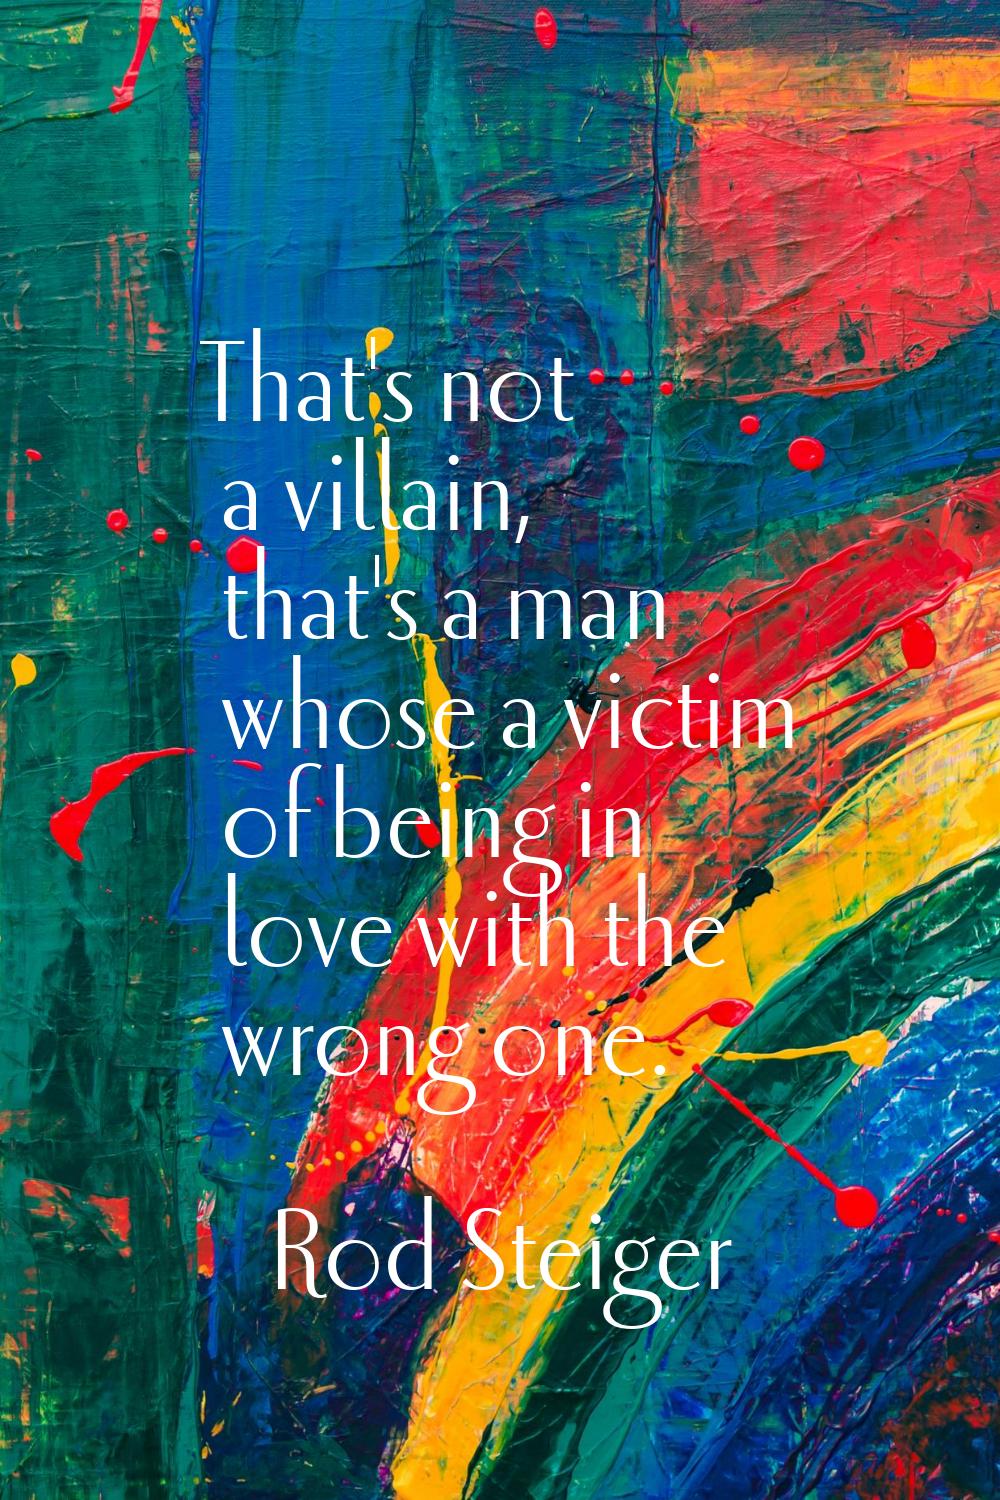 That's not a villain, that's a man whose a victim of being in love with the wrong one.